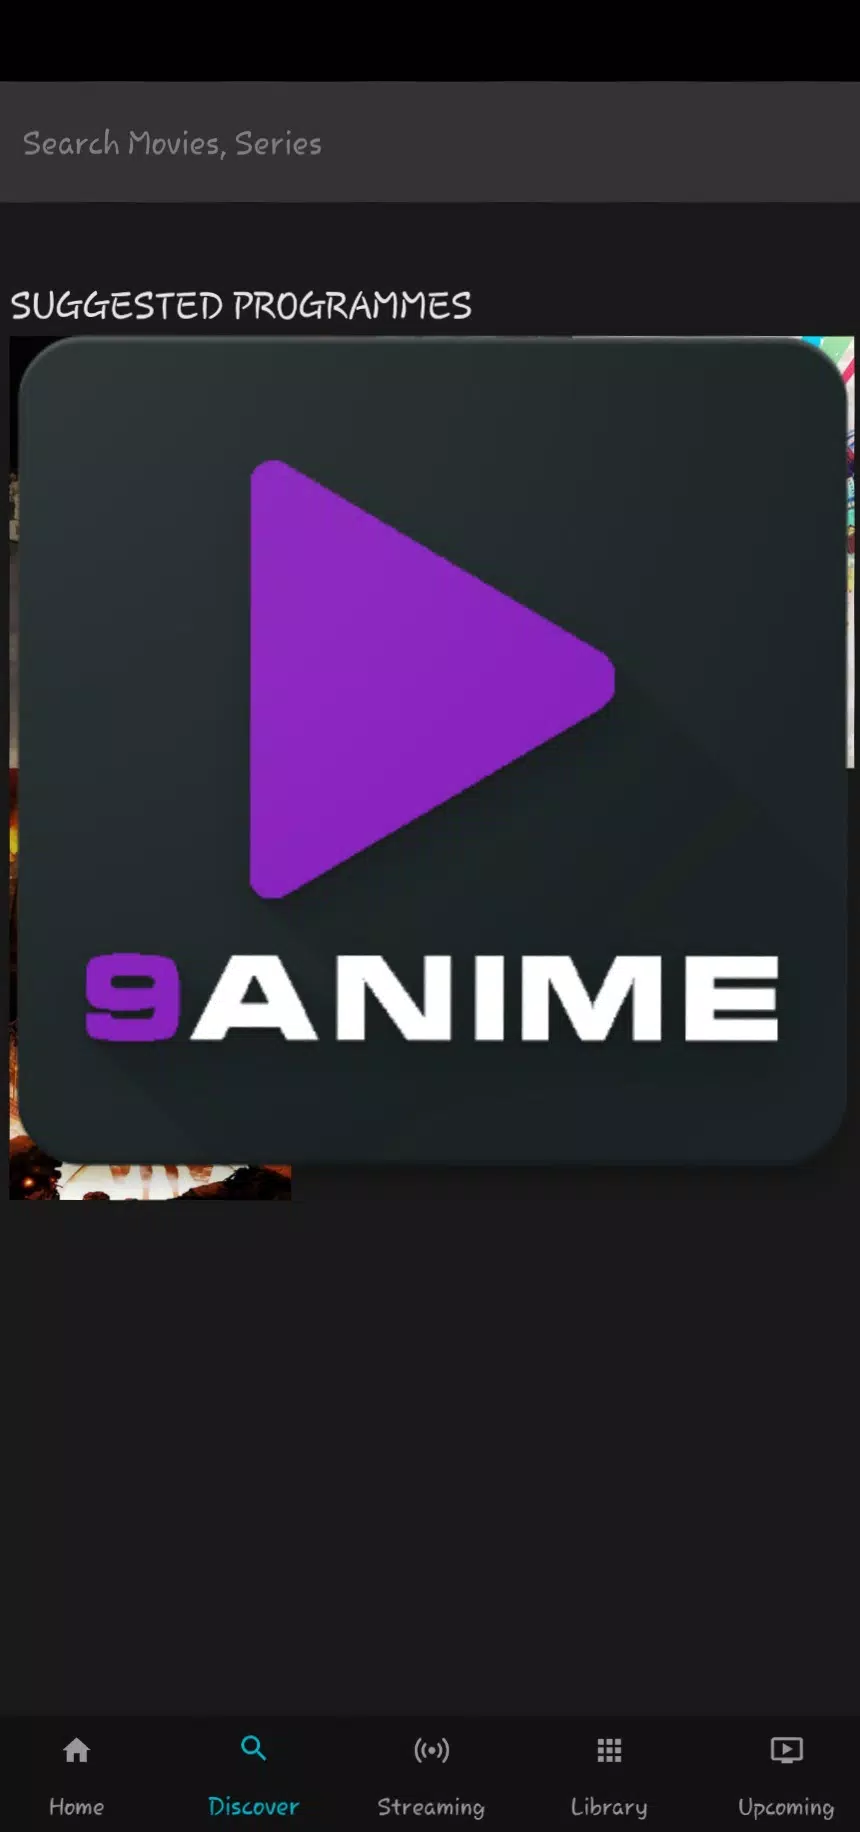 9anime APK A Comprehensive Guide to Streaming Anime on Your Mobile Device, by Gbplusapkpro